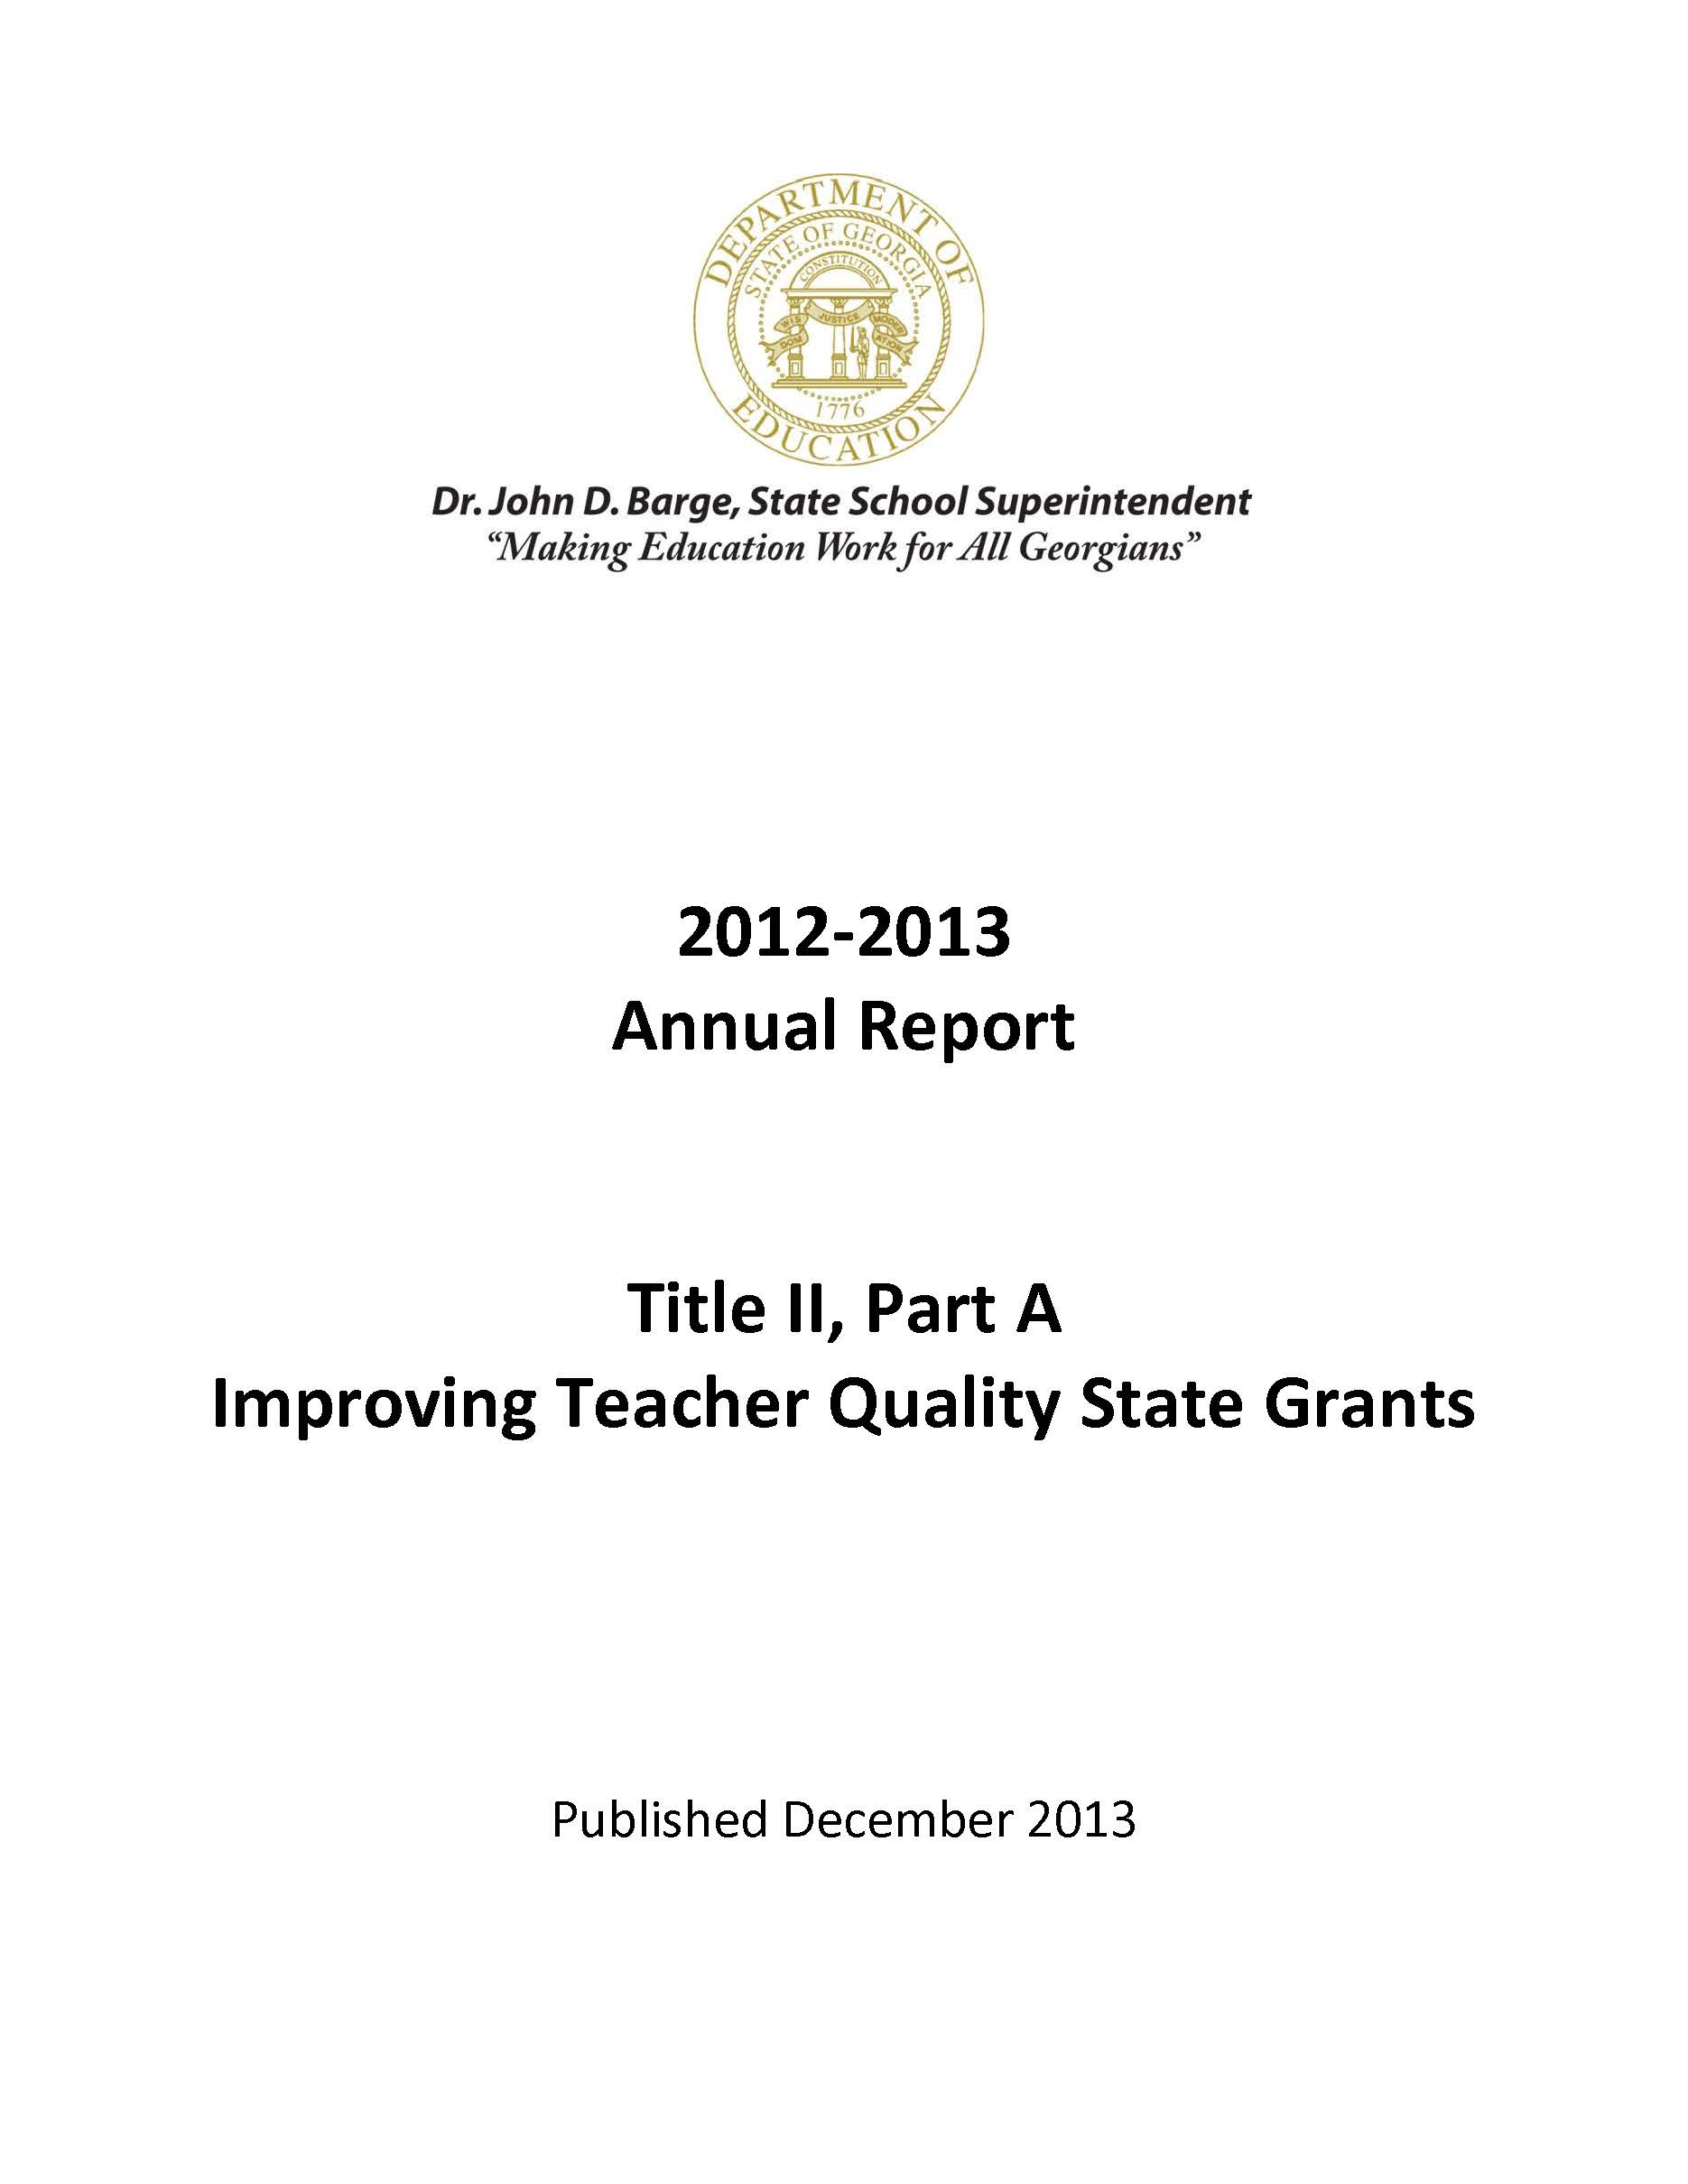 Cover page 2012-2013 Title II, Part A Annual Report